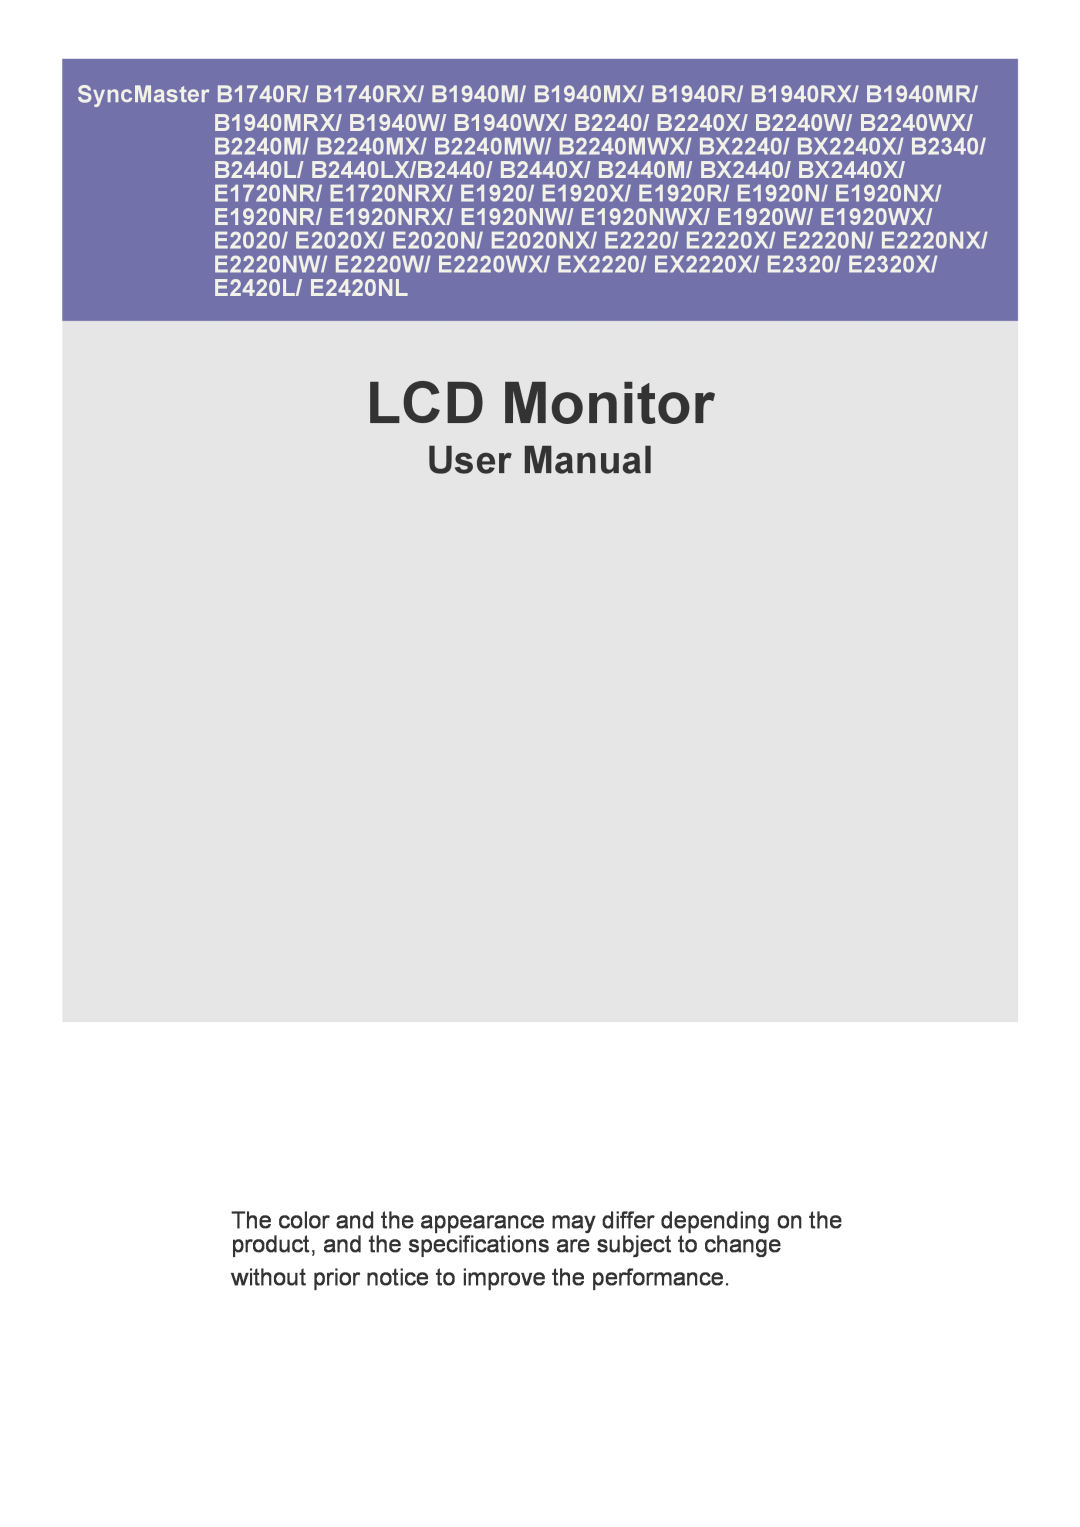 Samsung E1920NWX, E1920R, E1920NX user manual LCD Monitor, User Manual, without prior notice to improve the performance 